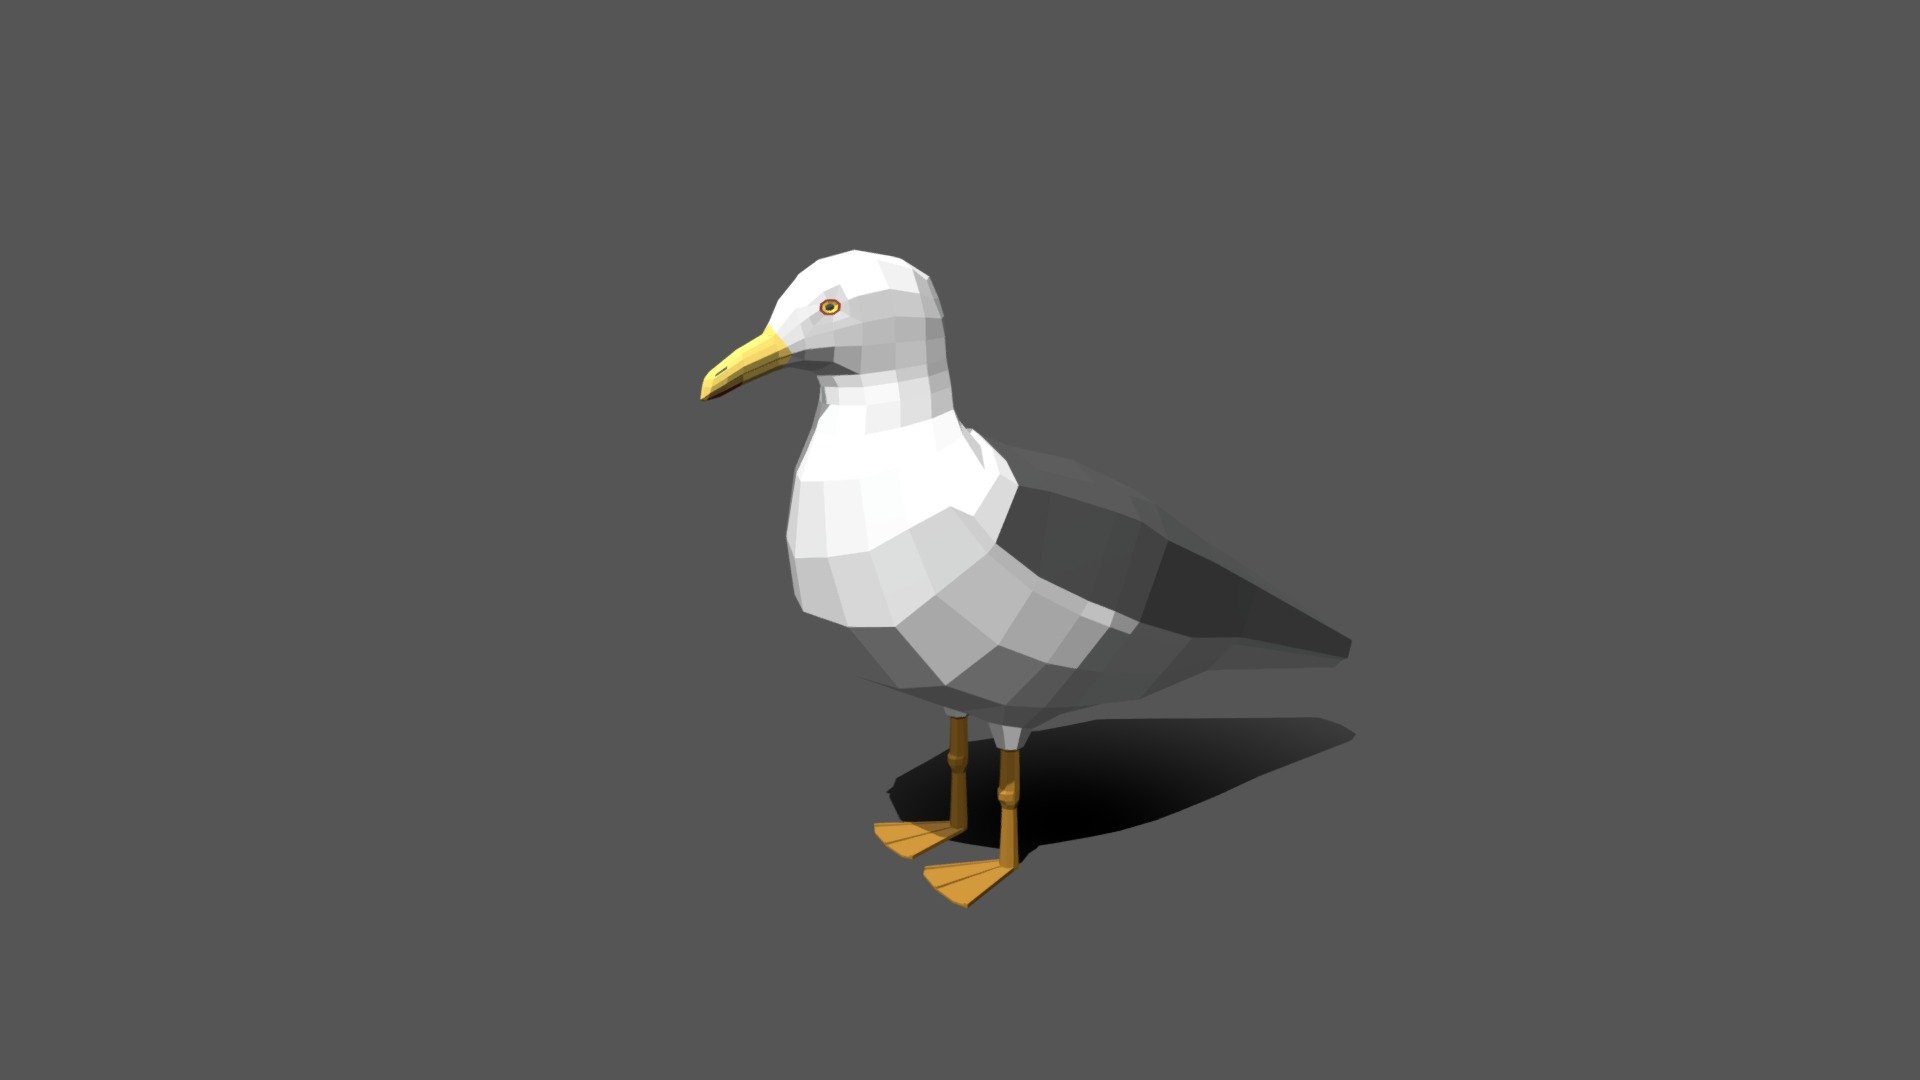 This is a low poly 3d model of a seagull. The low poly seagull was modeled and prepared for low-poly style renderings, background, general CG visualization presented as a mesh with quads only.

Verts : 784 Faces: 782

The model have simple materials with diffuse colors.

No ring, maps and no UVW mapping is available.

The original file was created in blender. You will receive a 3DS, OBJ, FBX, blend, DAE, Stl.

All preview images were rendered with Blender Cycles. Product is ready to render out-of-the-box. Please note that the lights, cameras, and background is only included in the .blend file. The model is clean and alone in the other provided files, centred at origin and has real-world scale 3d model